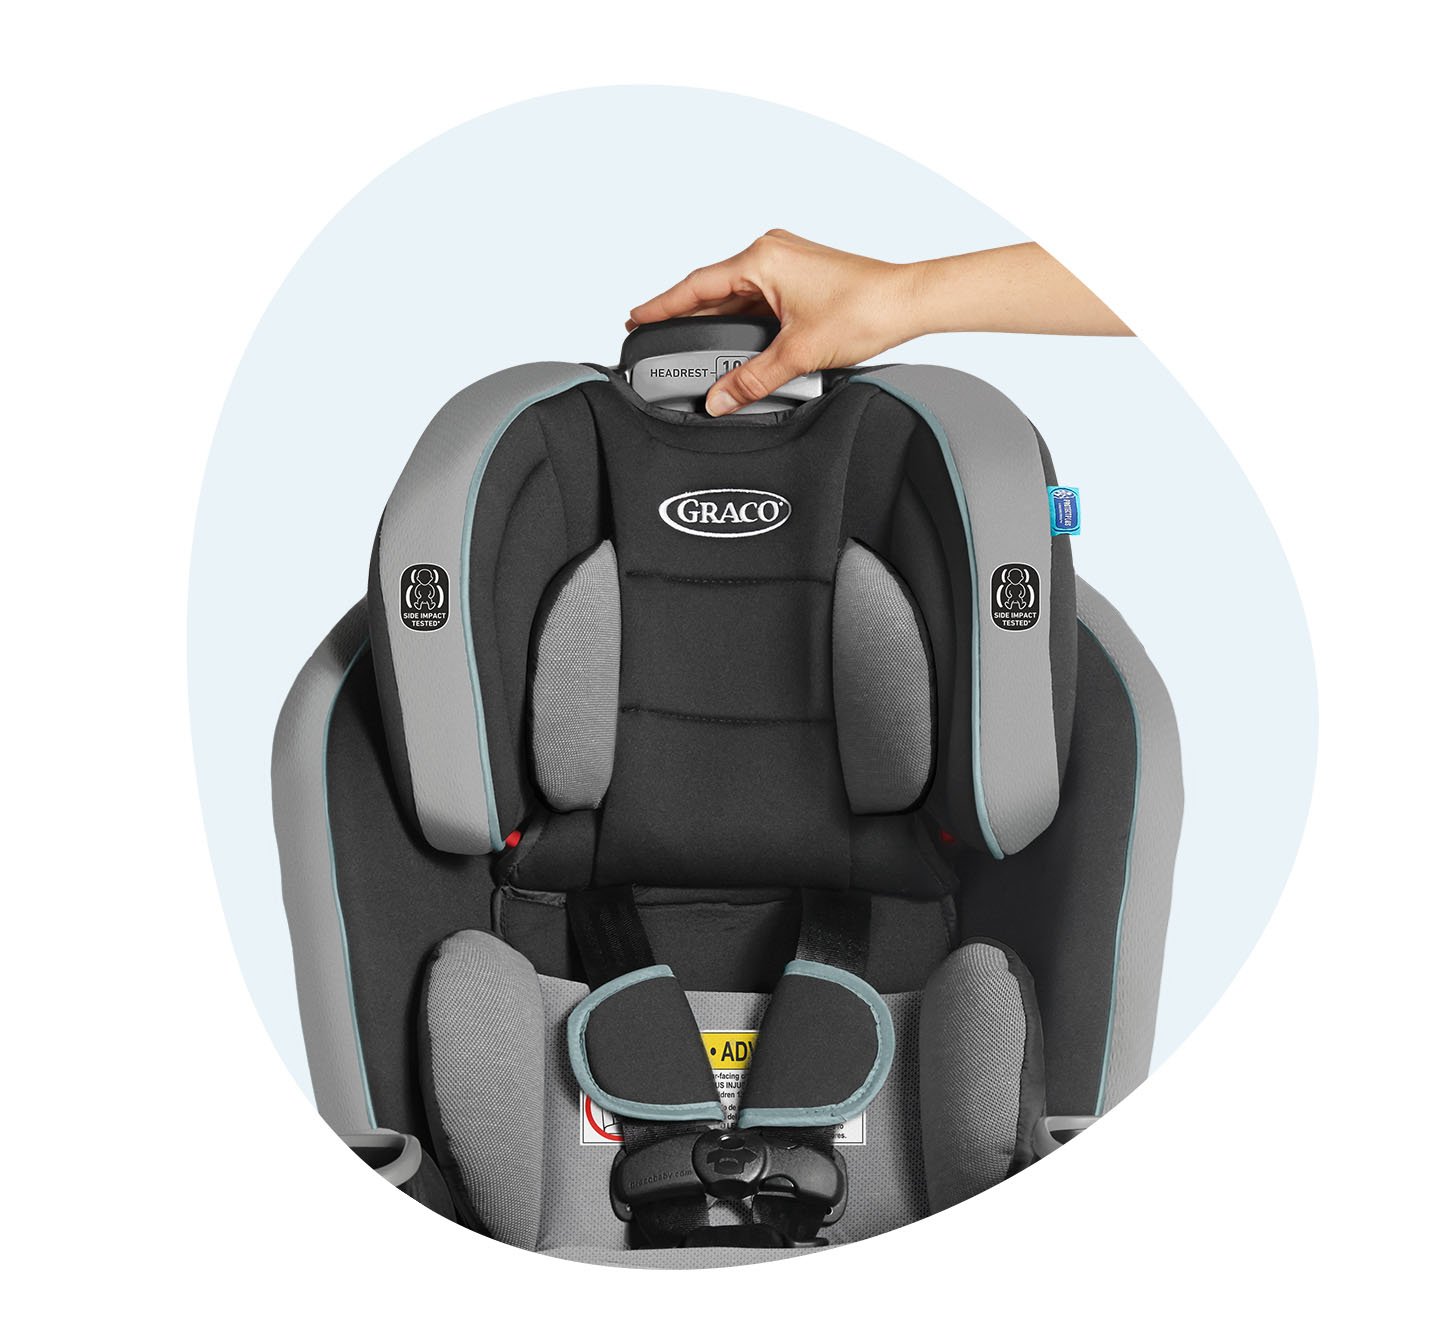 Graco Graco child car seat Used in VGC 